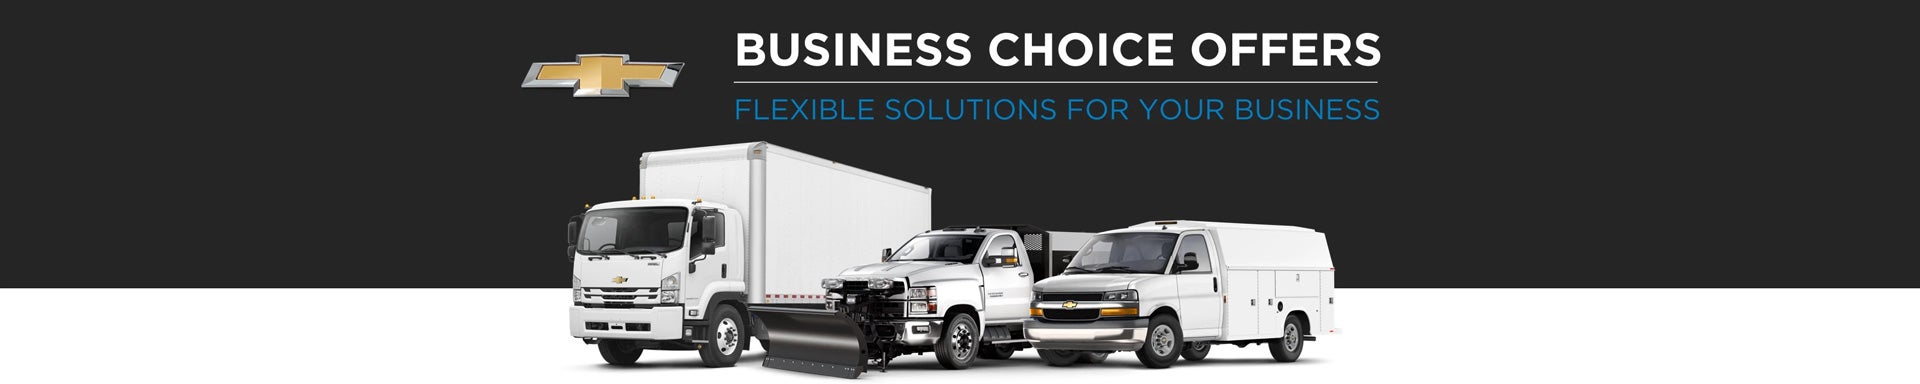 Chevrolet Business Choice Offers - Flexible Solutions for your Business - Lynch Chevrolet of Mukwonago in Mukwonago WI